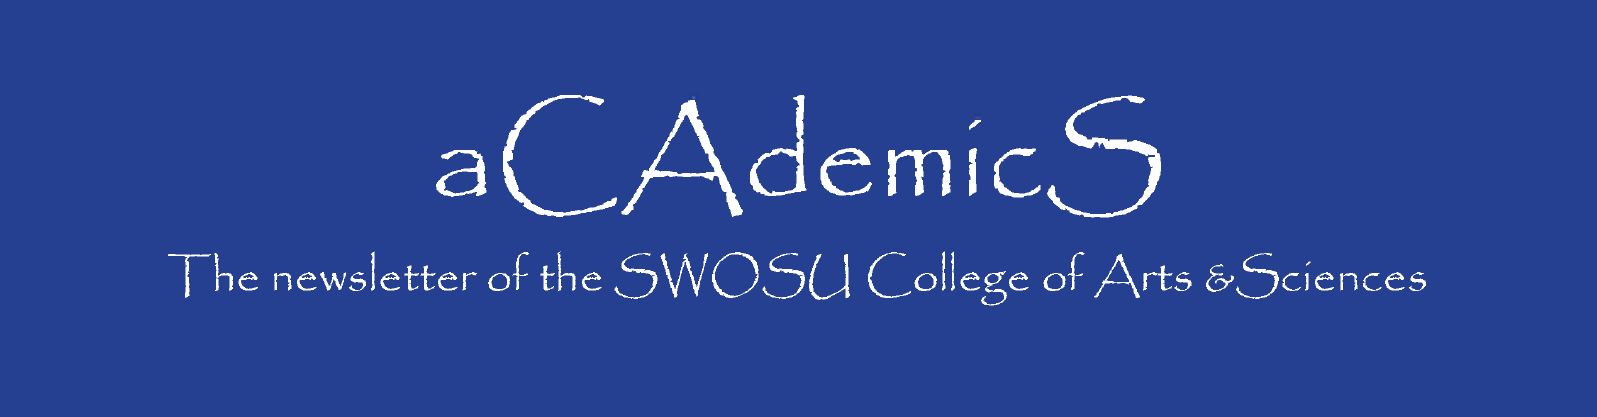 aCAdemicS: The Newsletter of the SWOSU College of Arts & Sciences